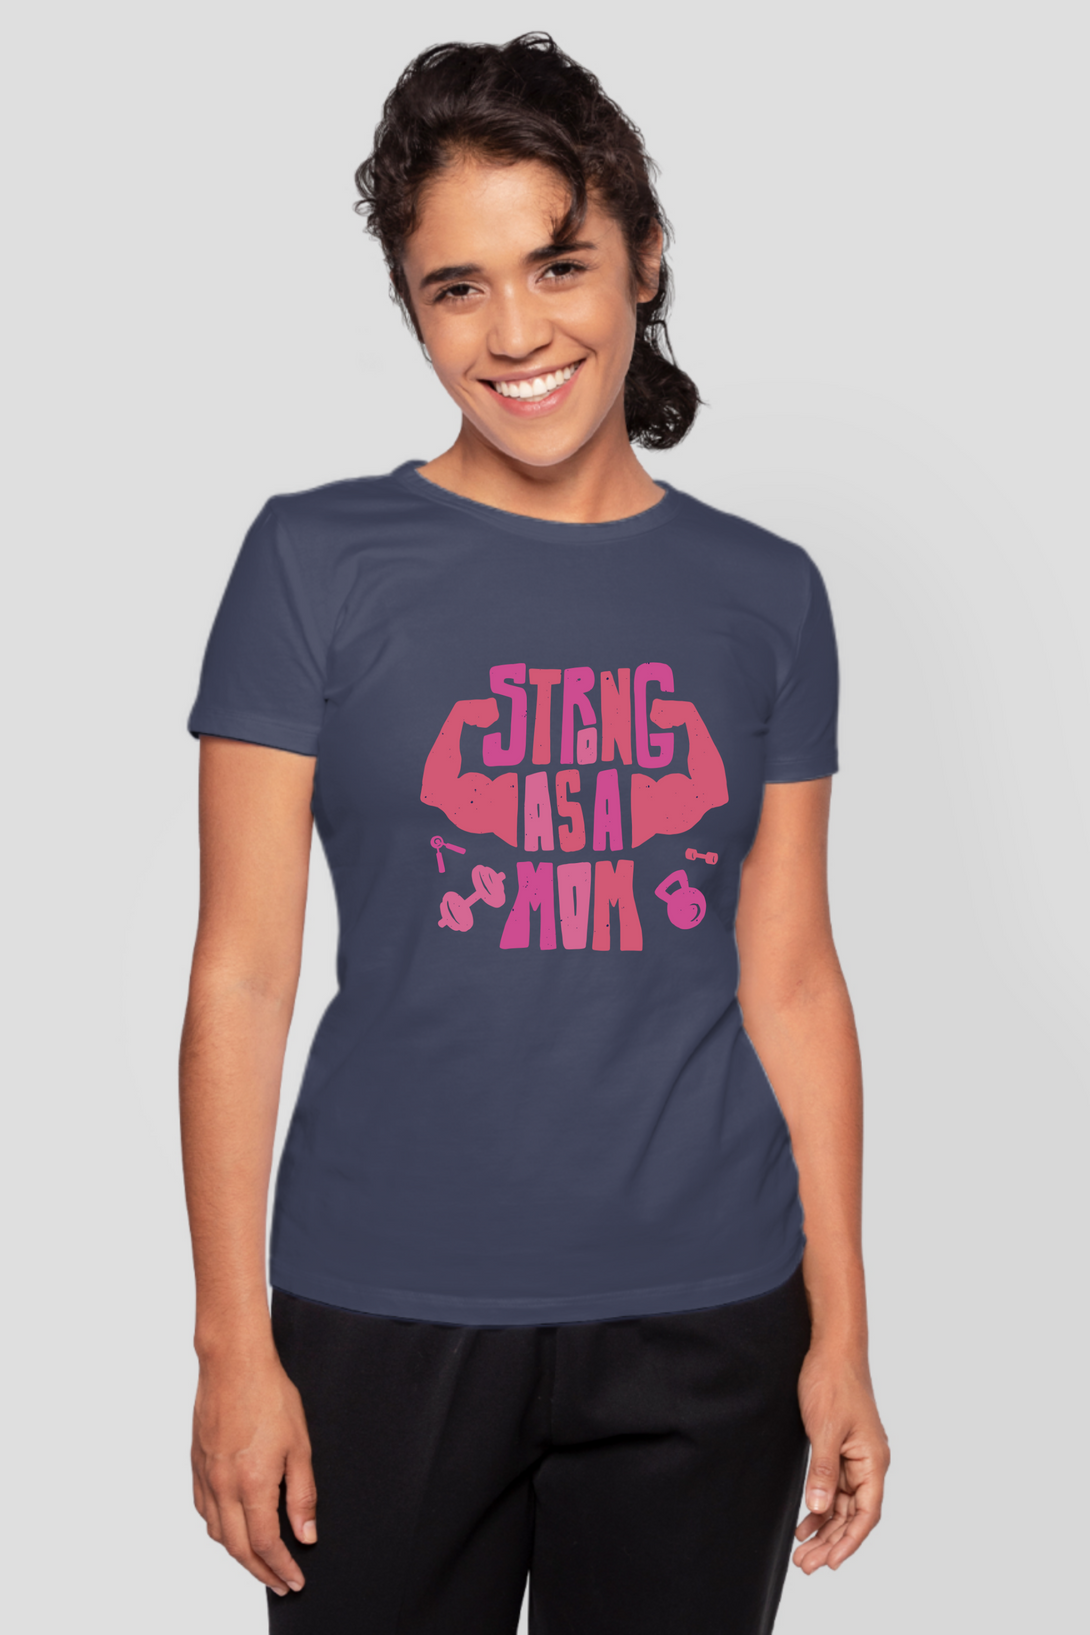 Strong As A Mom Printed T-Shirt For Women - WowWaves - 9